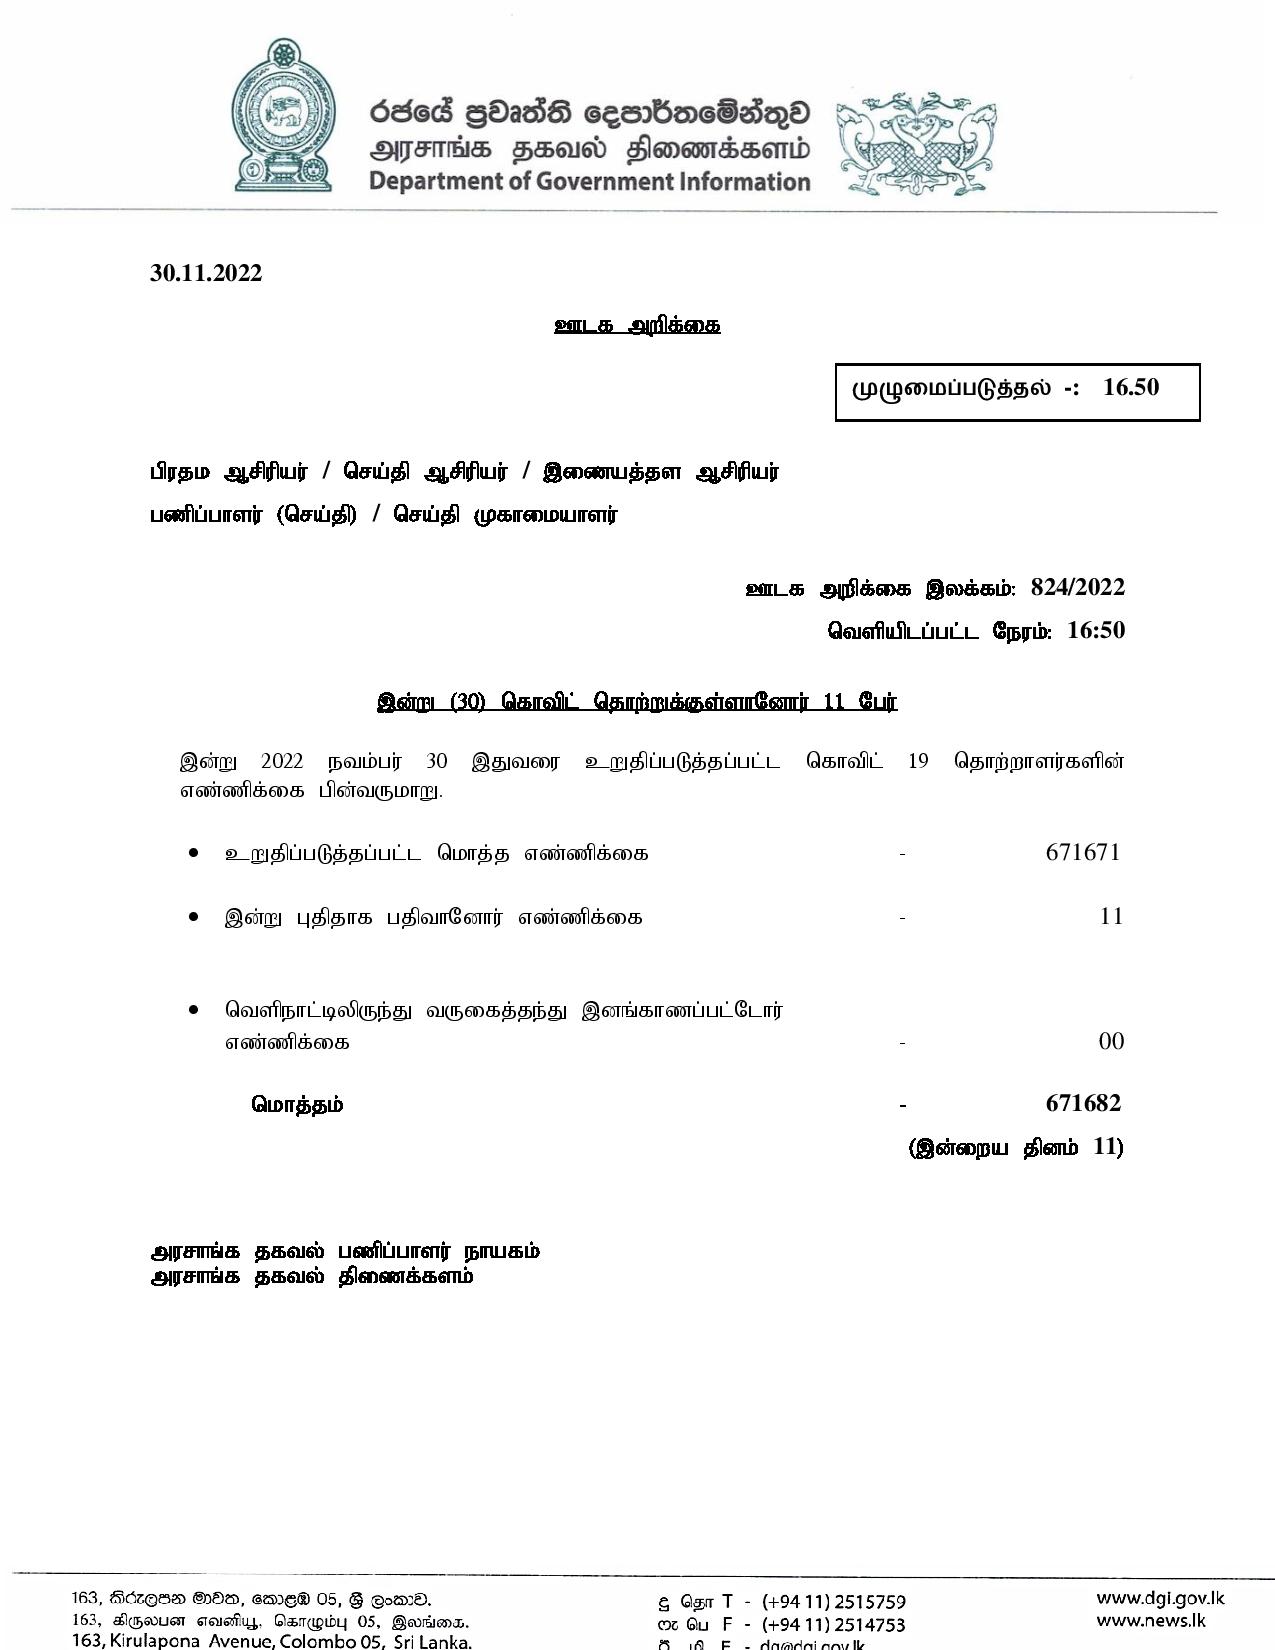 Release No 824 Tamil page 001